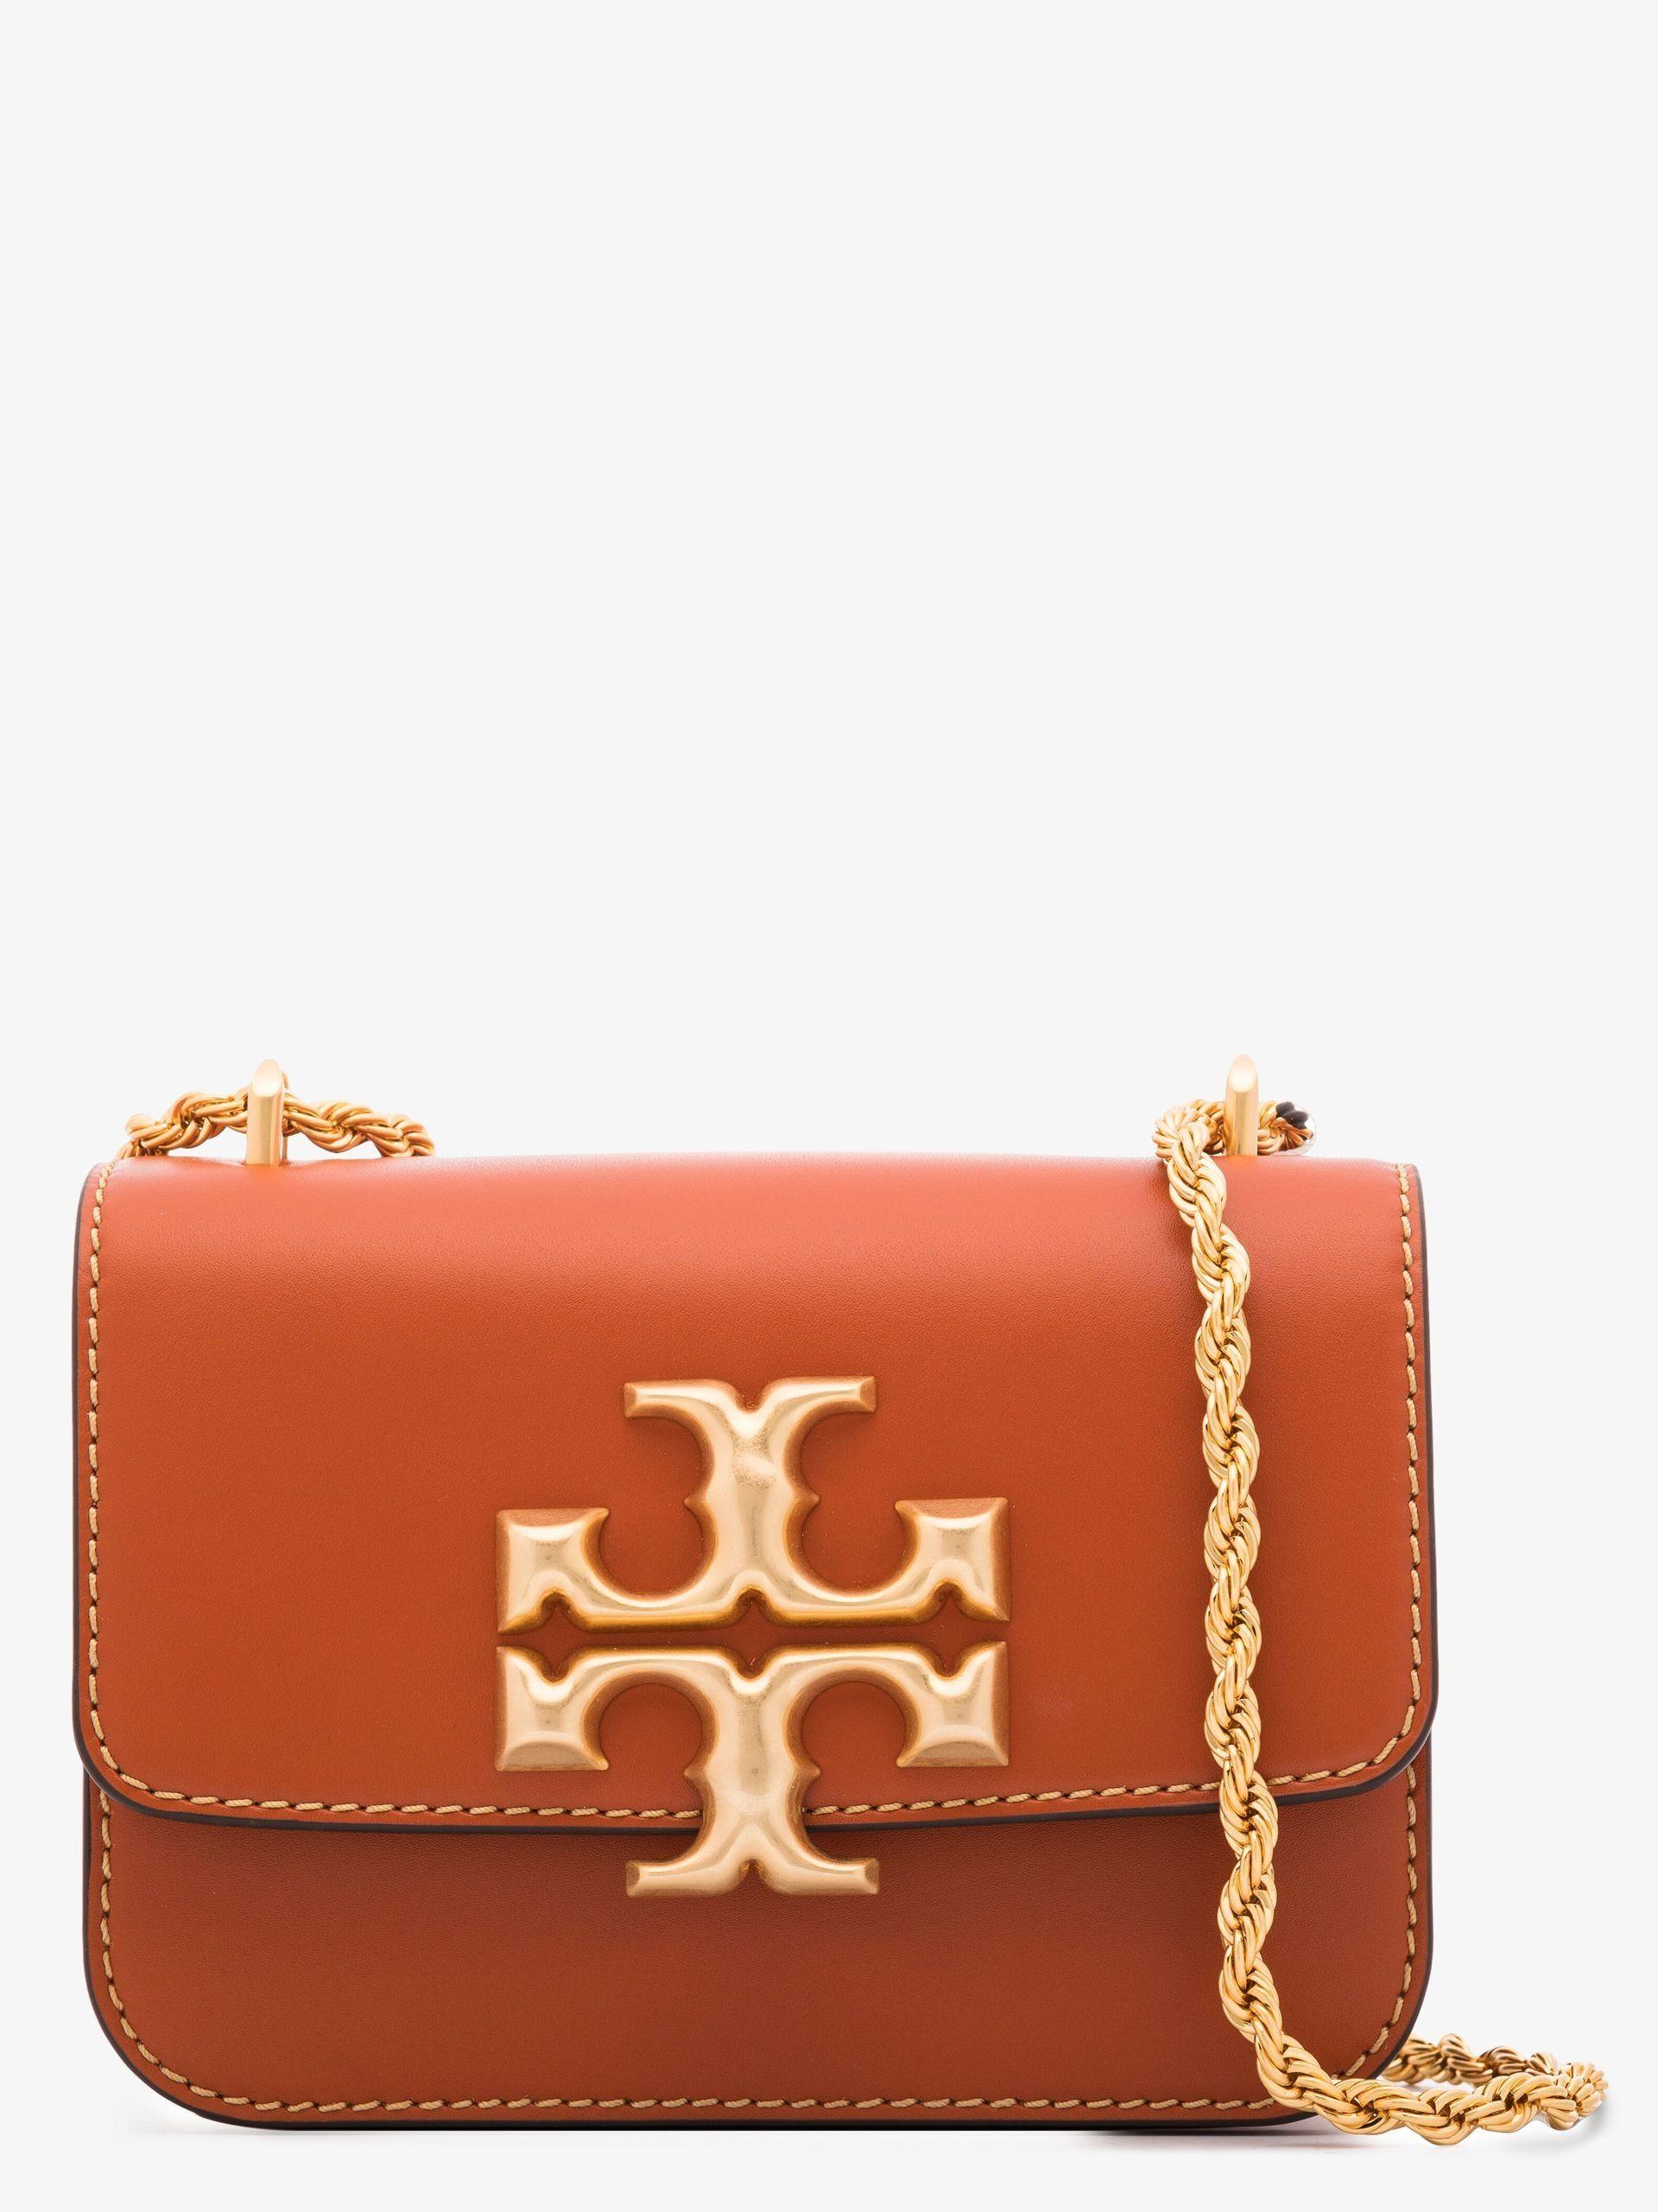 Eleanor small leather shoulder bag by Tory Burch